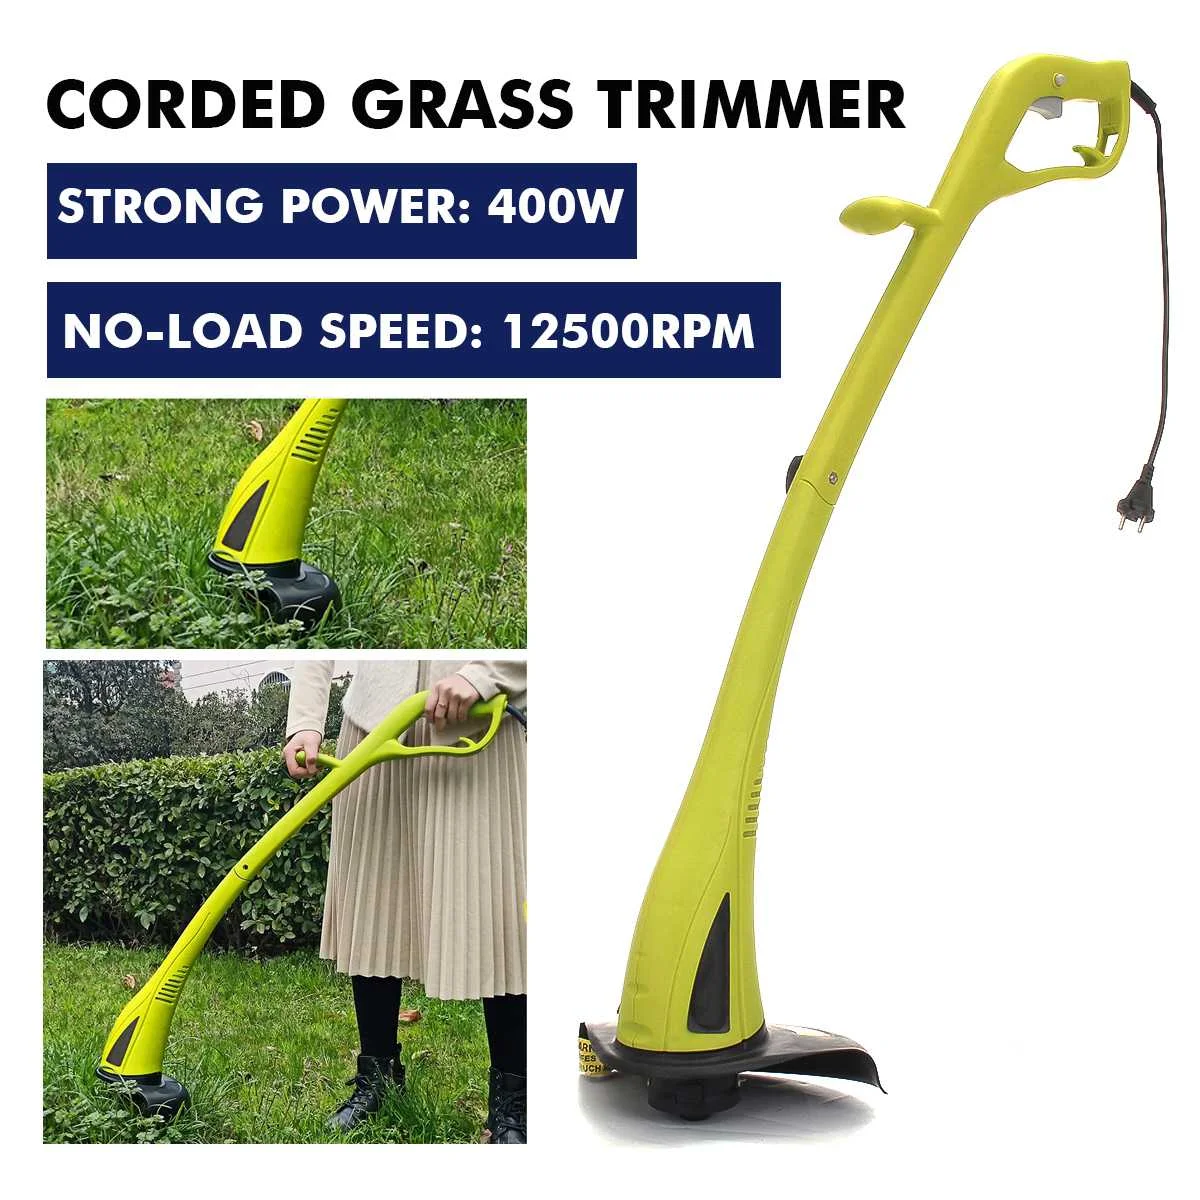 

Portable Electric Grass Trimmer Handheld Lawn Mower Agricultural Household Cordless Weeder Garden Pruning Cutter Tools 400W